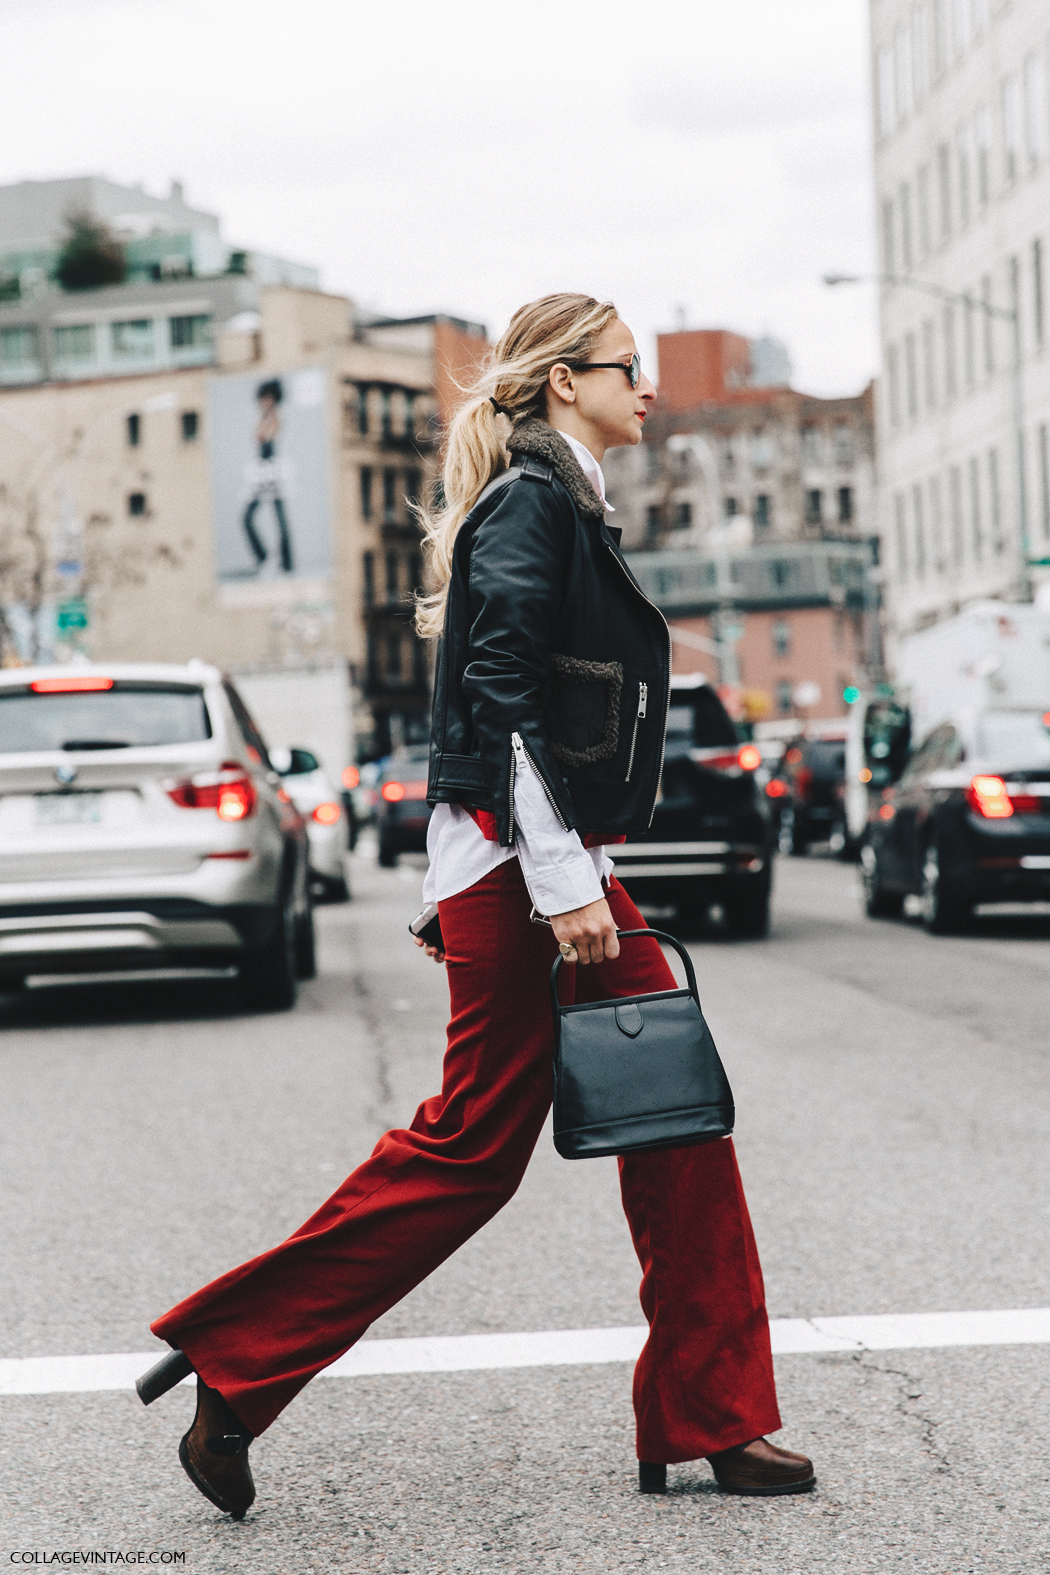 NYFW-New_York_Fashion_Week-Fall_Winter-16-Street_Style-Red_Trousers-Biker_Jacket-Rounded_Sunnies-